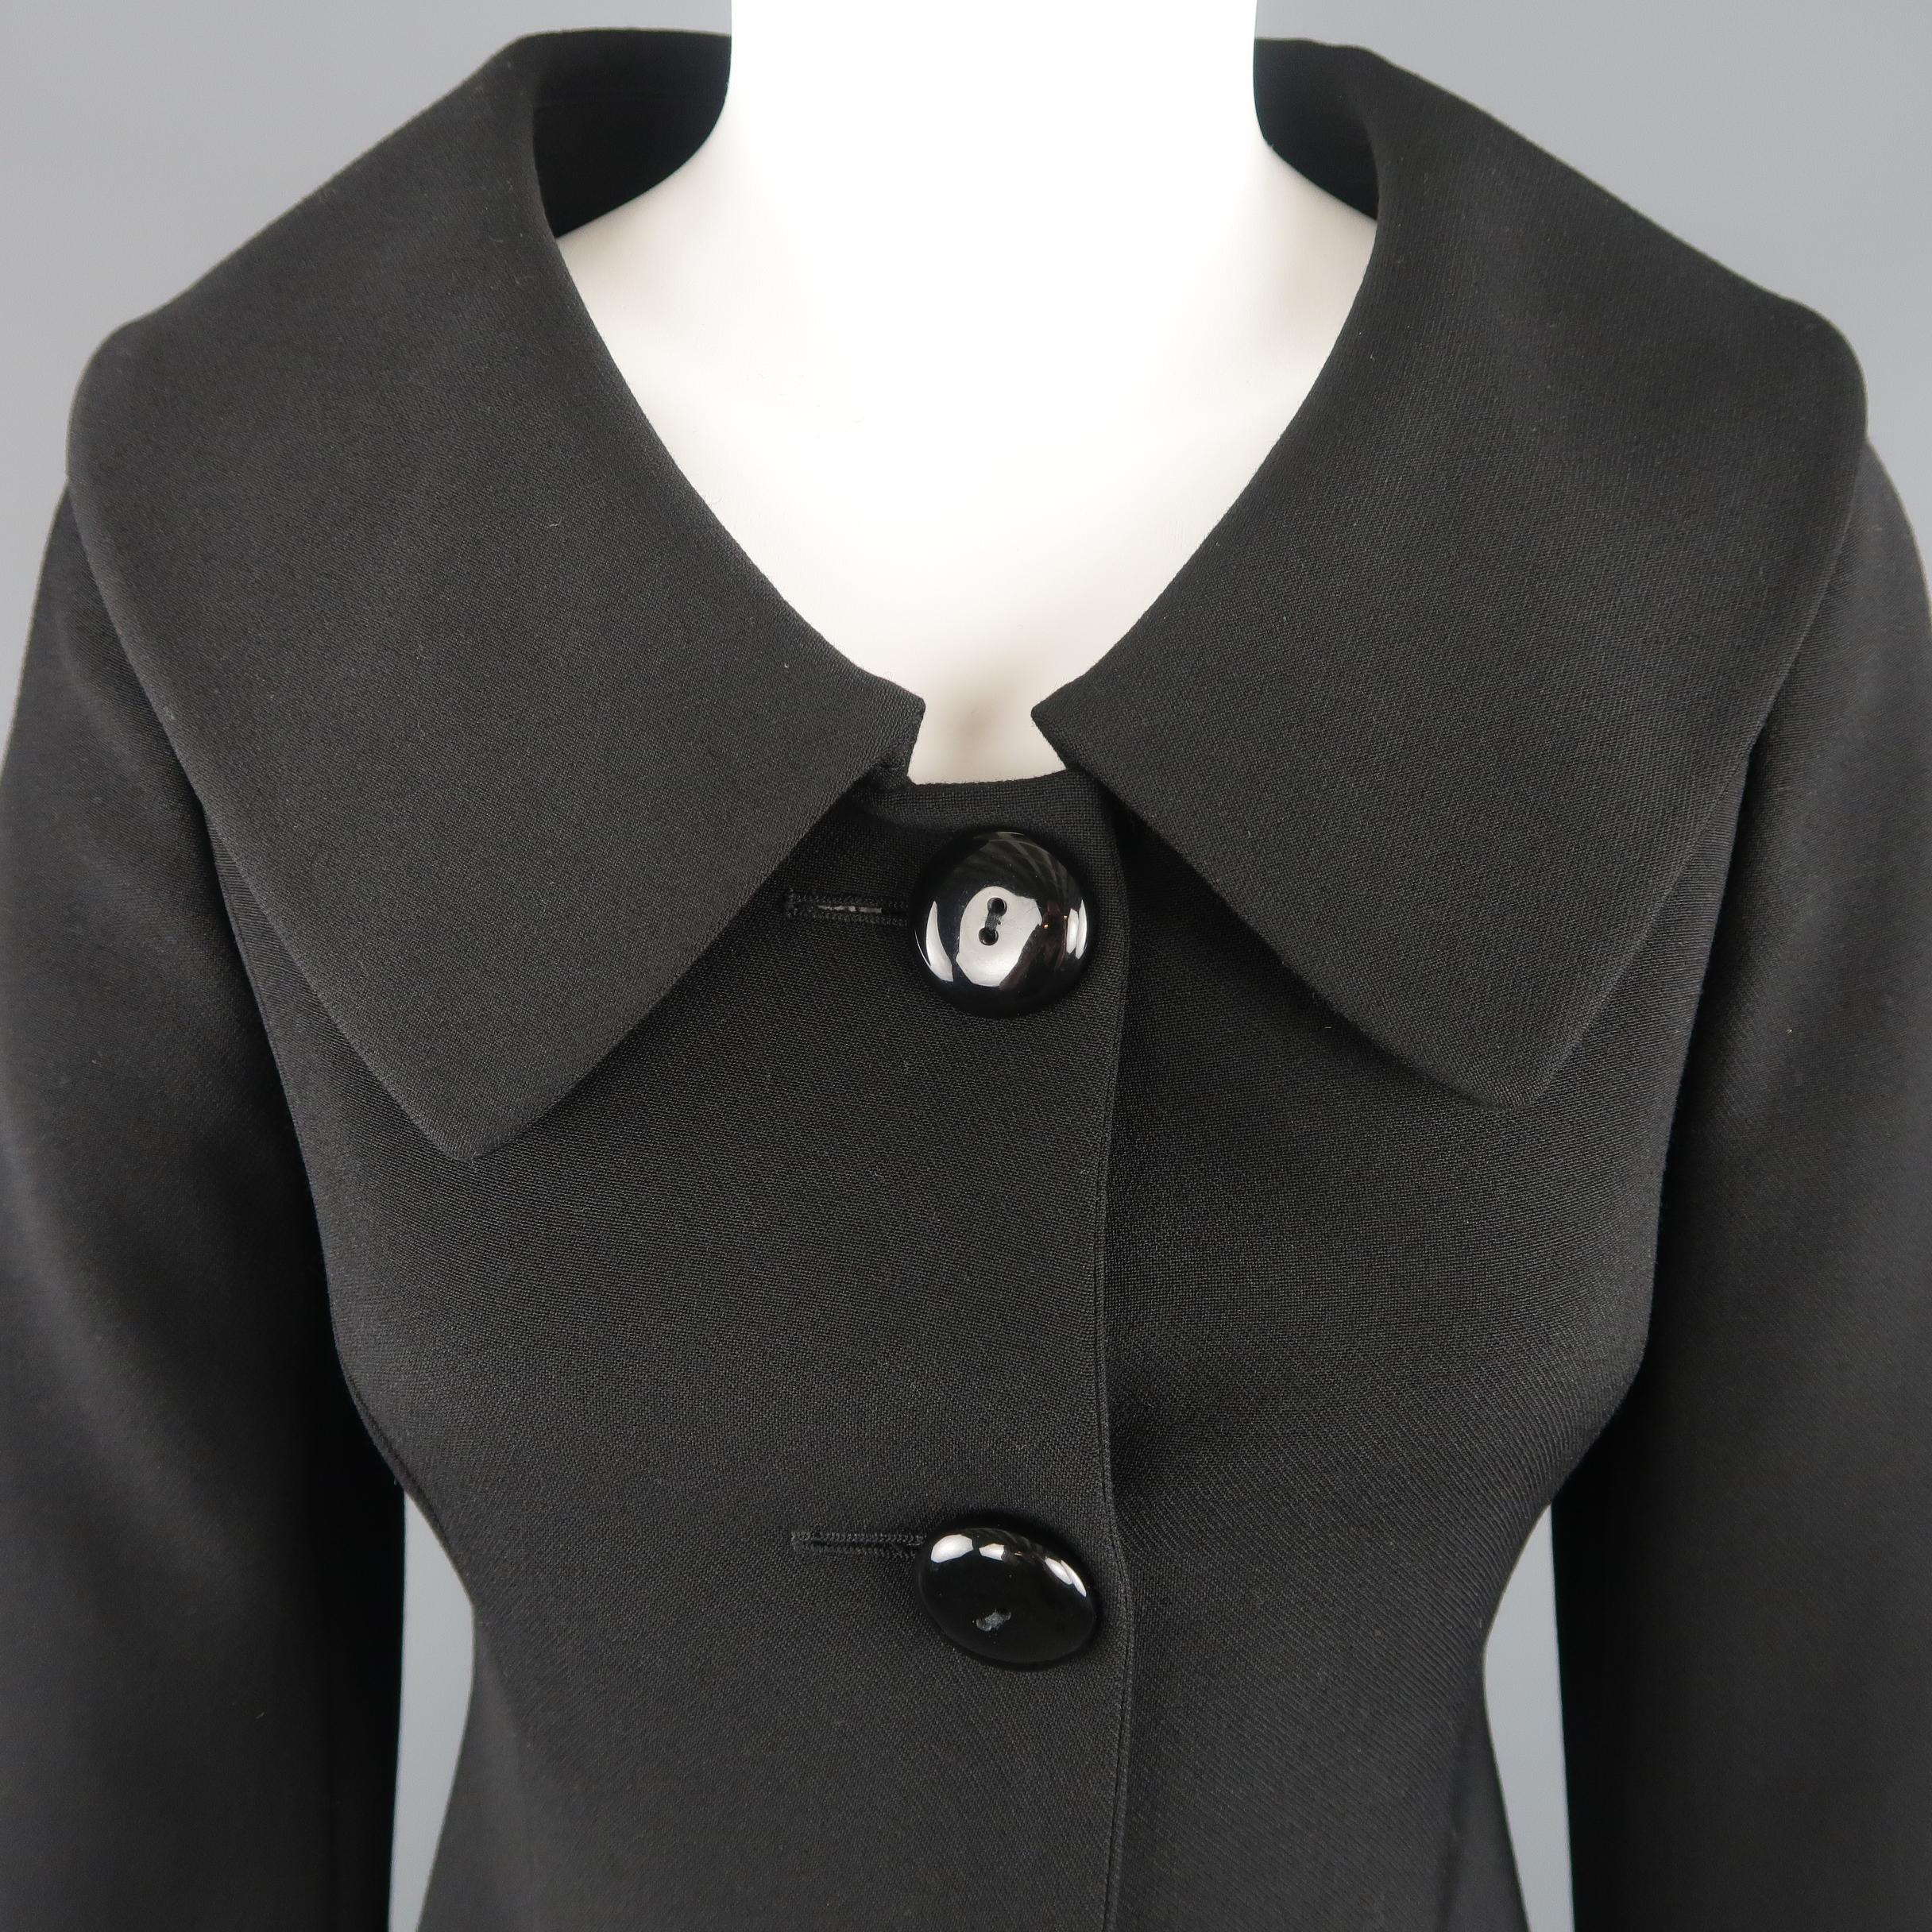 MOSCHINO CHEAP & CHIC coat comes in black wool blend fabric with an oversized scoop neck collar, slit pockets, and bow back detail. Made in Italy.
 
Excellent Pre-Owned Condition.
Marked: US 4
 
Measurements:
 
Shoulder: 14 in.
Bust: 34 in.
Waist: